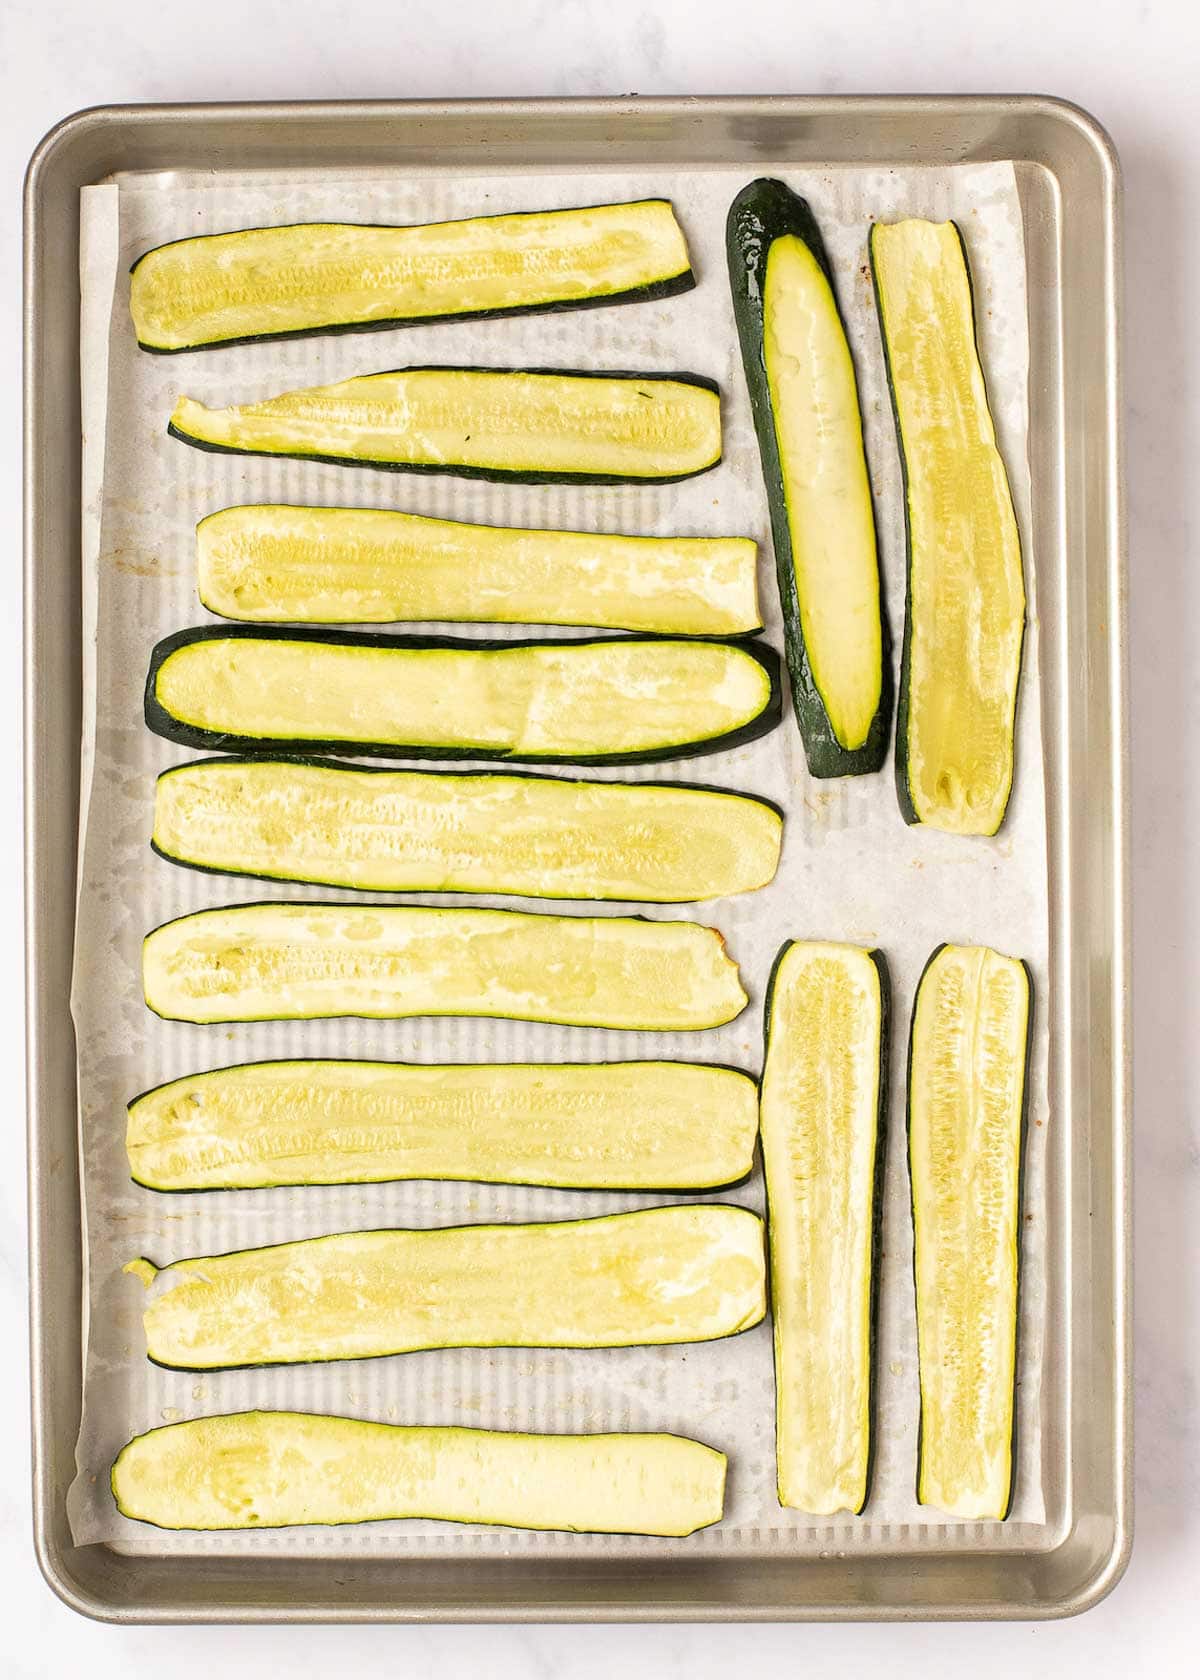 zucchini is sliced thin and baked to reduce the moisture in the recipe